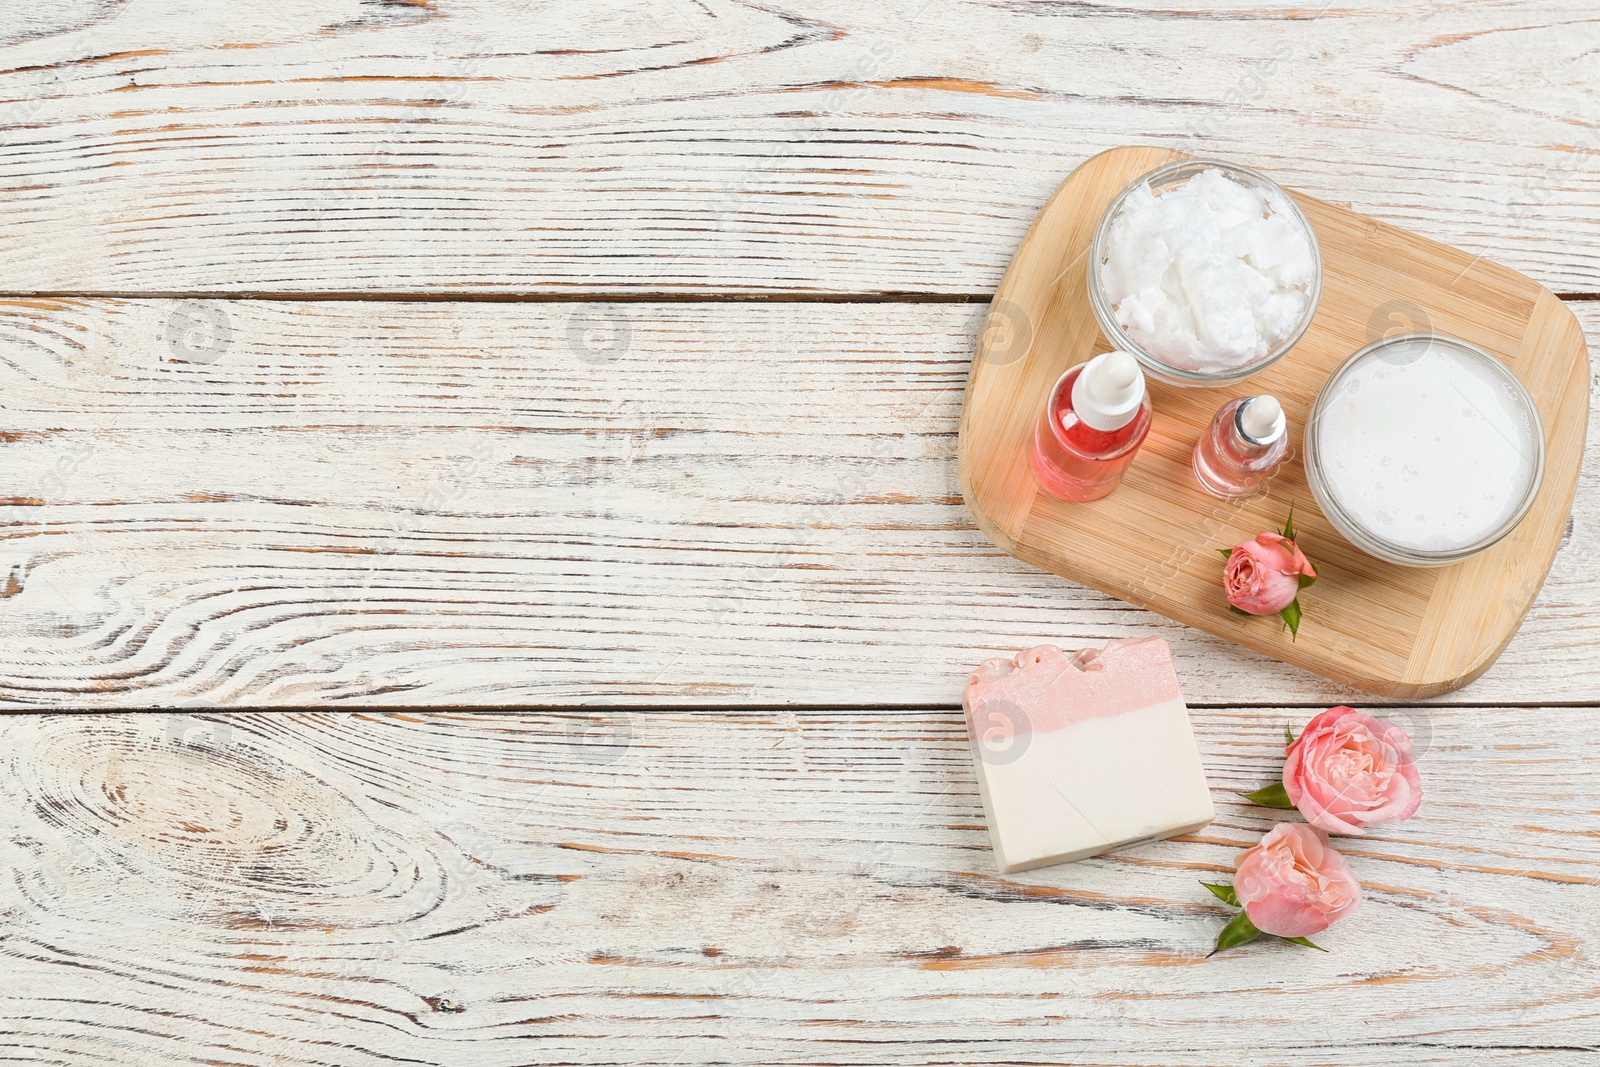 Photo of Flat lay composition with natural handmade soap and ingredients on white wooden table, space for text